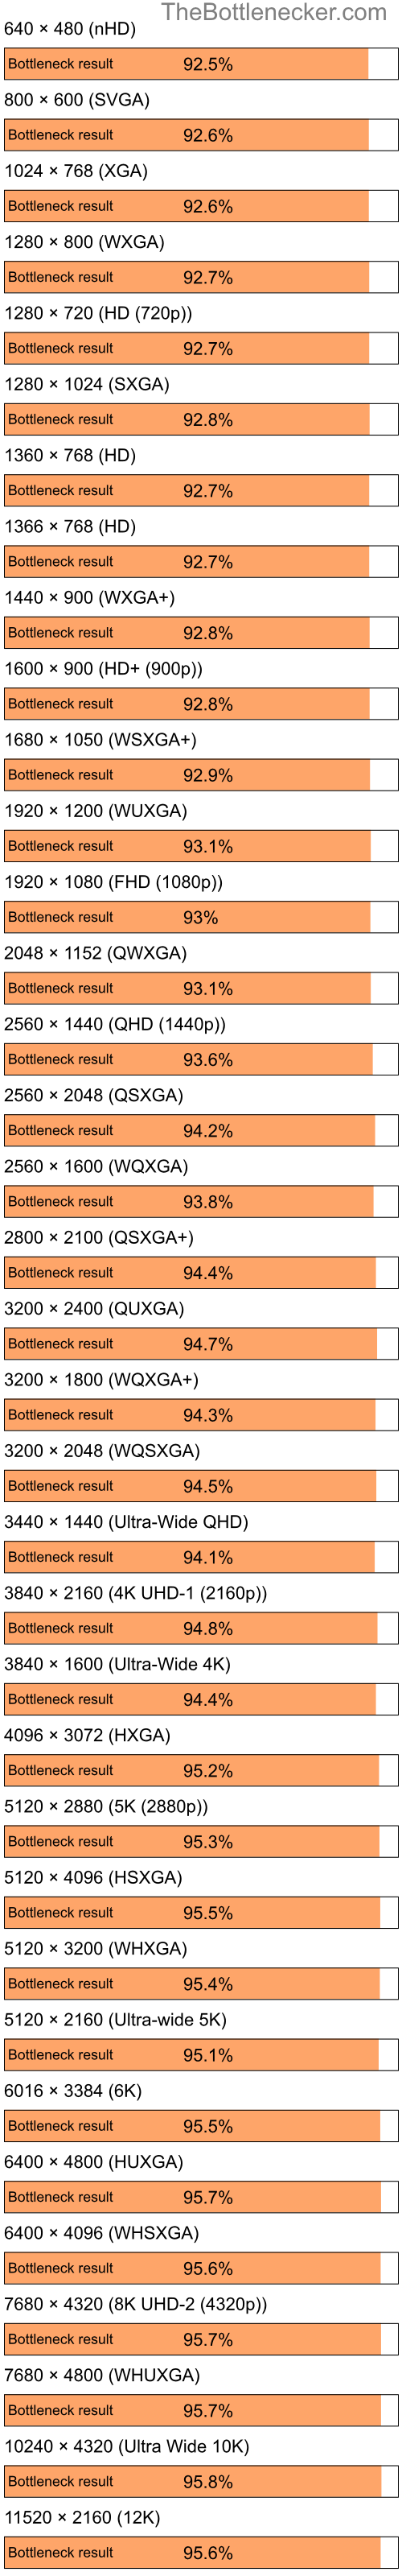 Bottleneck results by resolution for Intel Celeron and NVIDIA GeForce2 MX in Graphic Card Intense Tasks